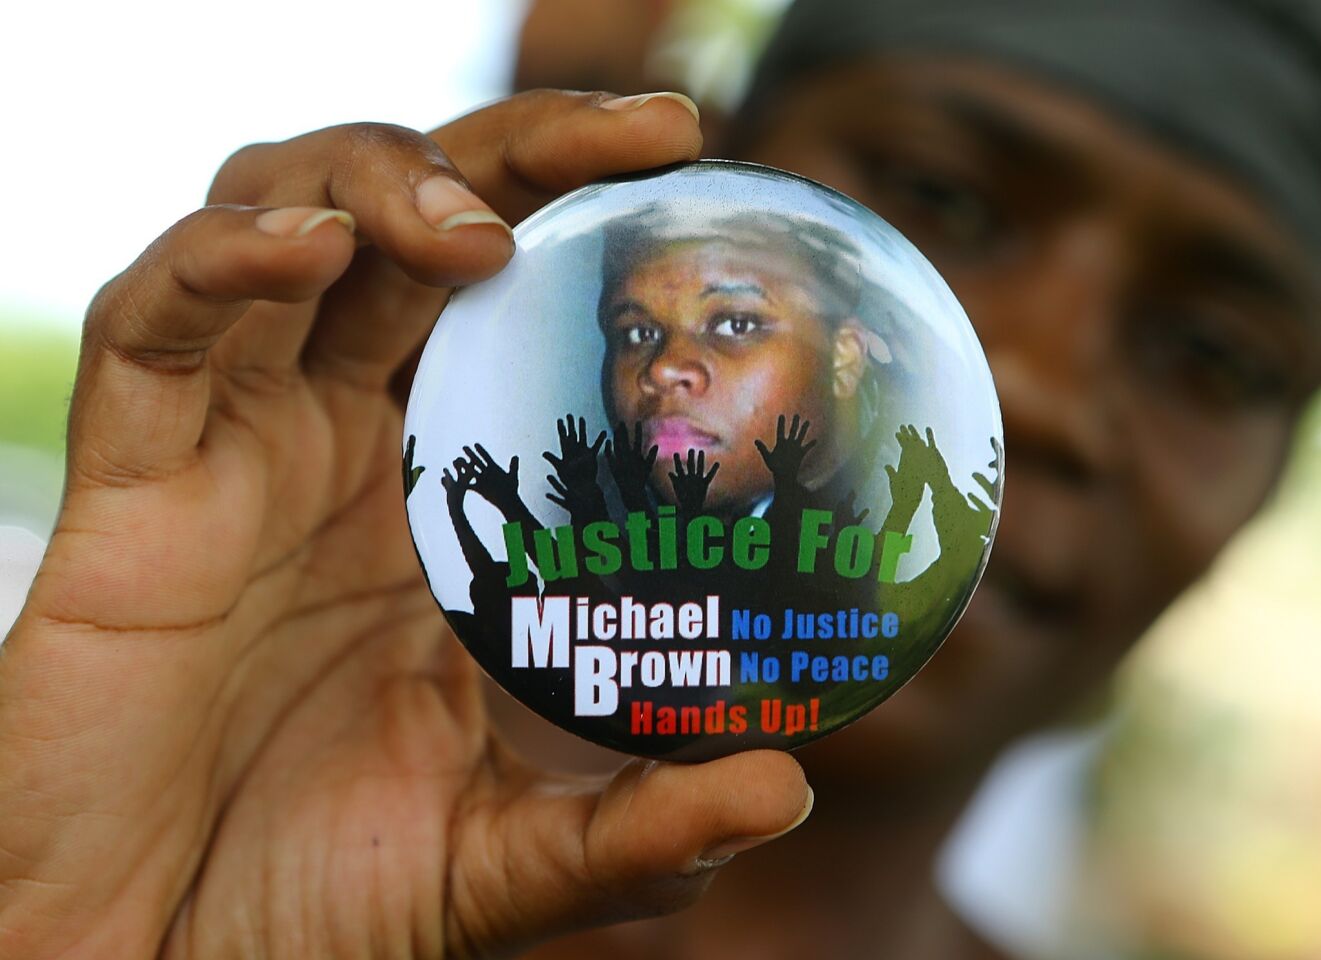 Nikki Jones of Spanish Lake, Mo., displays a button in support of Michael Brown.